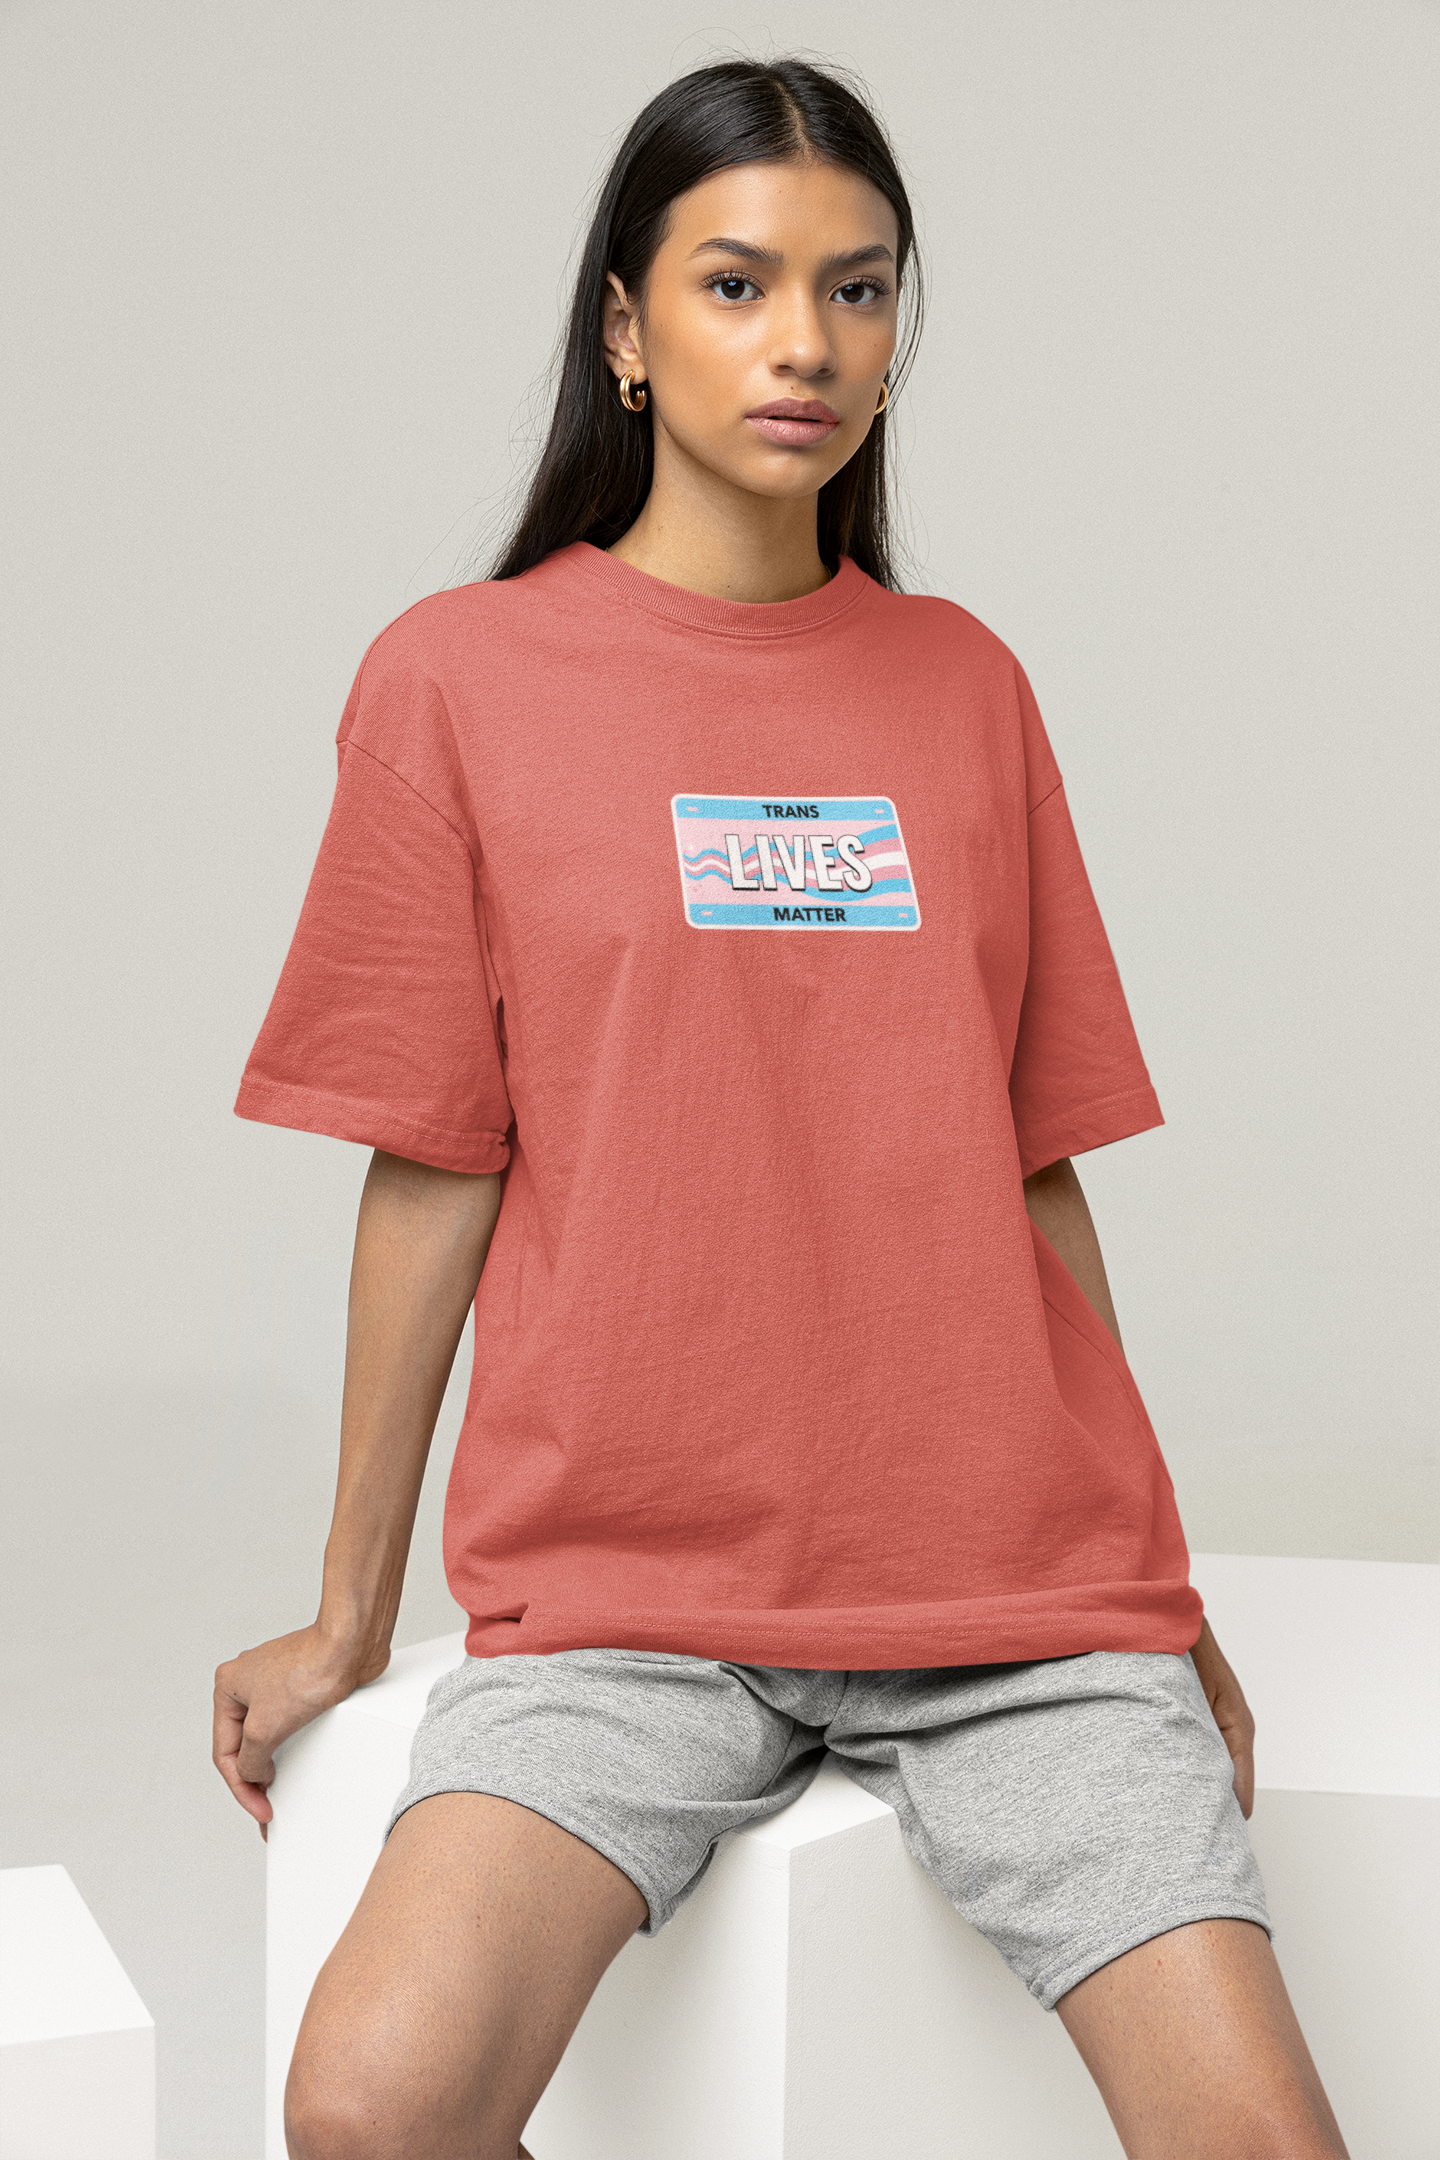 OVERSIZED TSHIRTS CORAL: LIVES